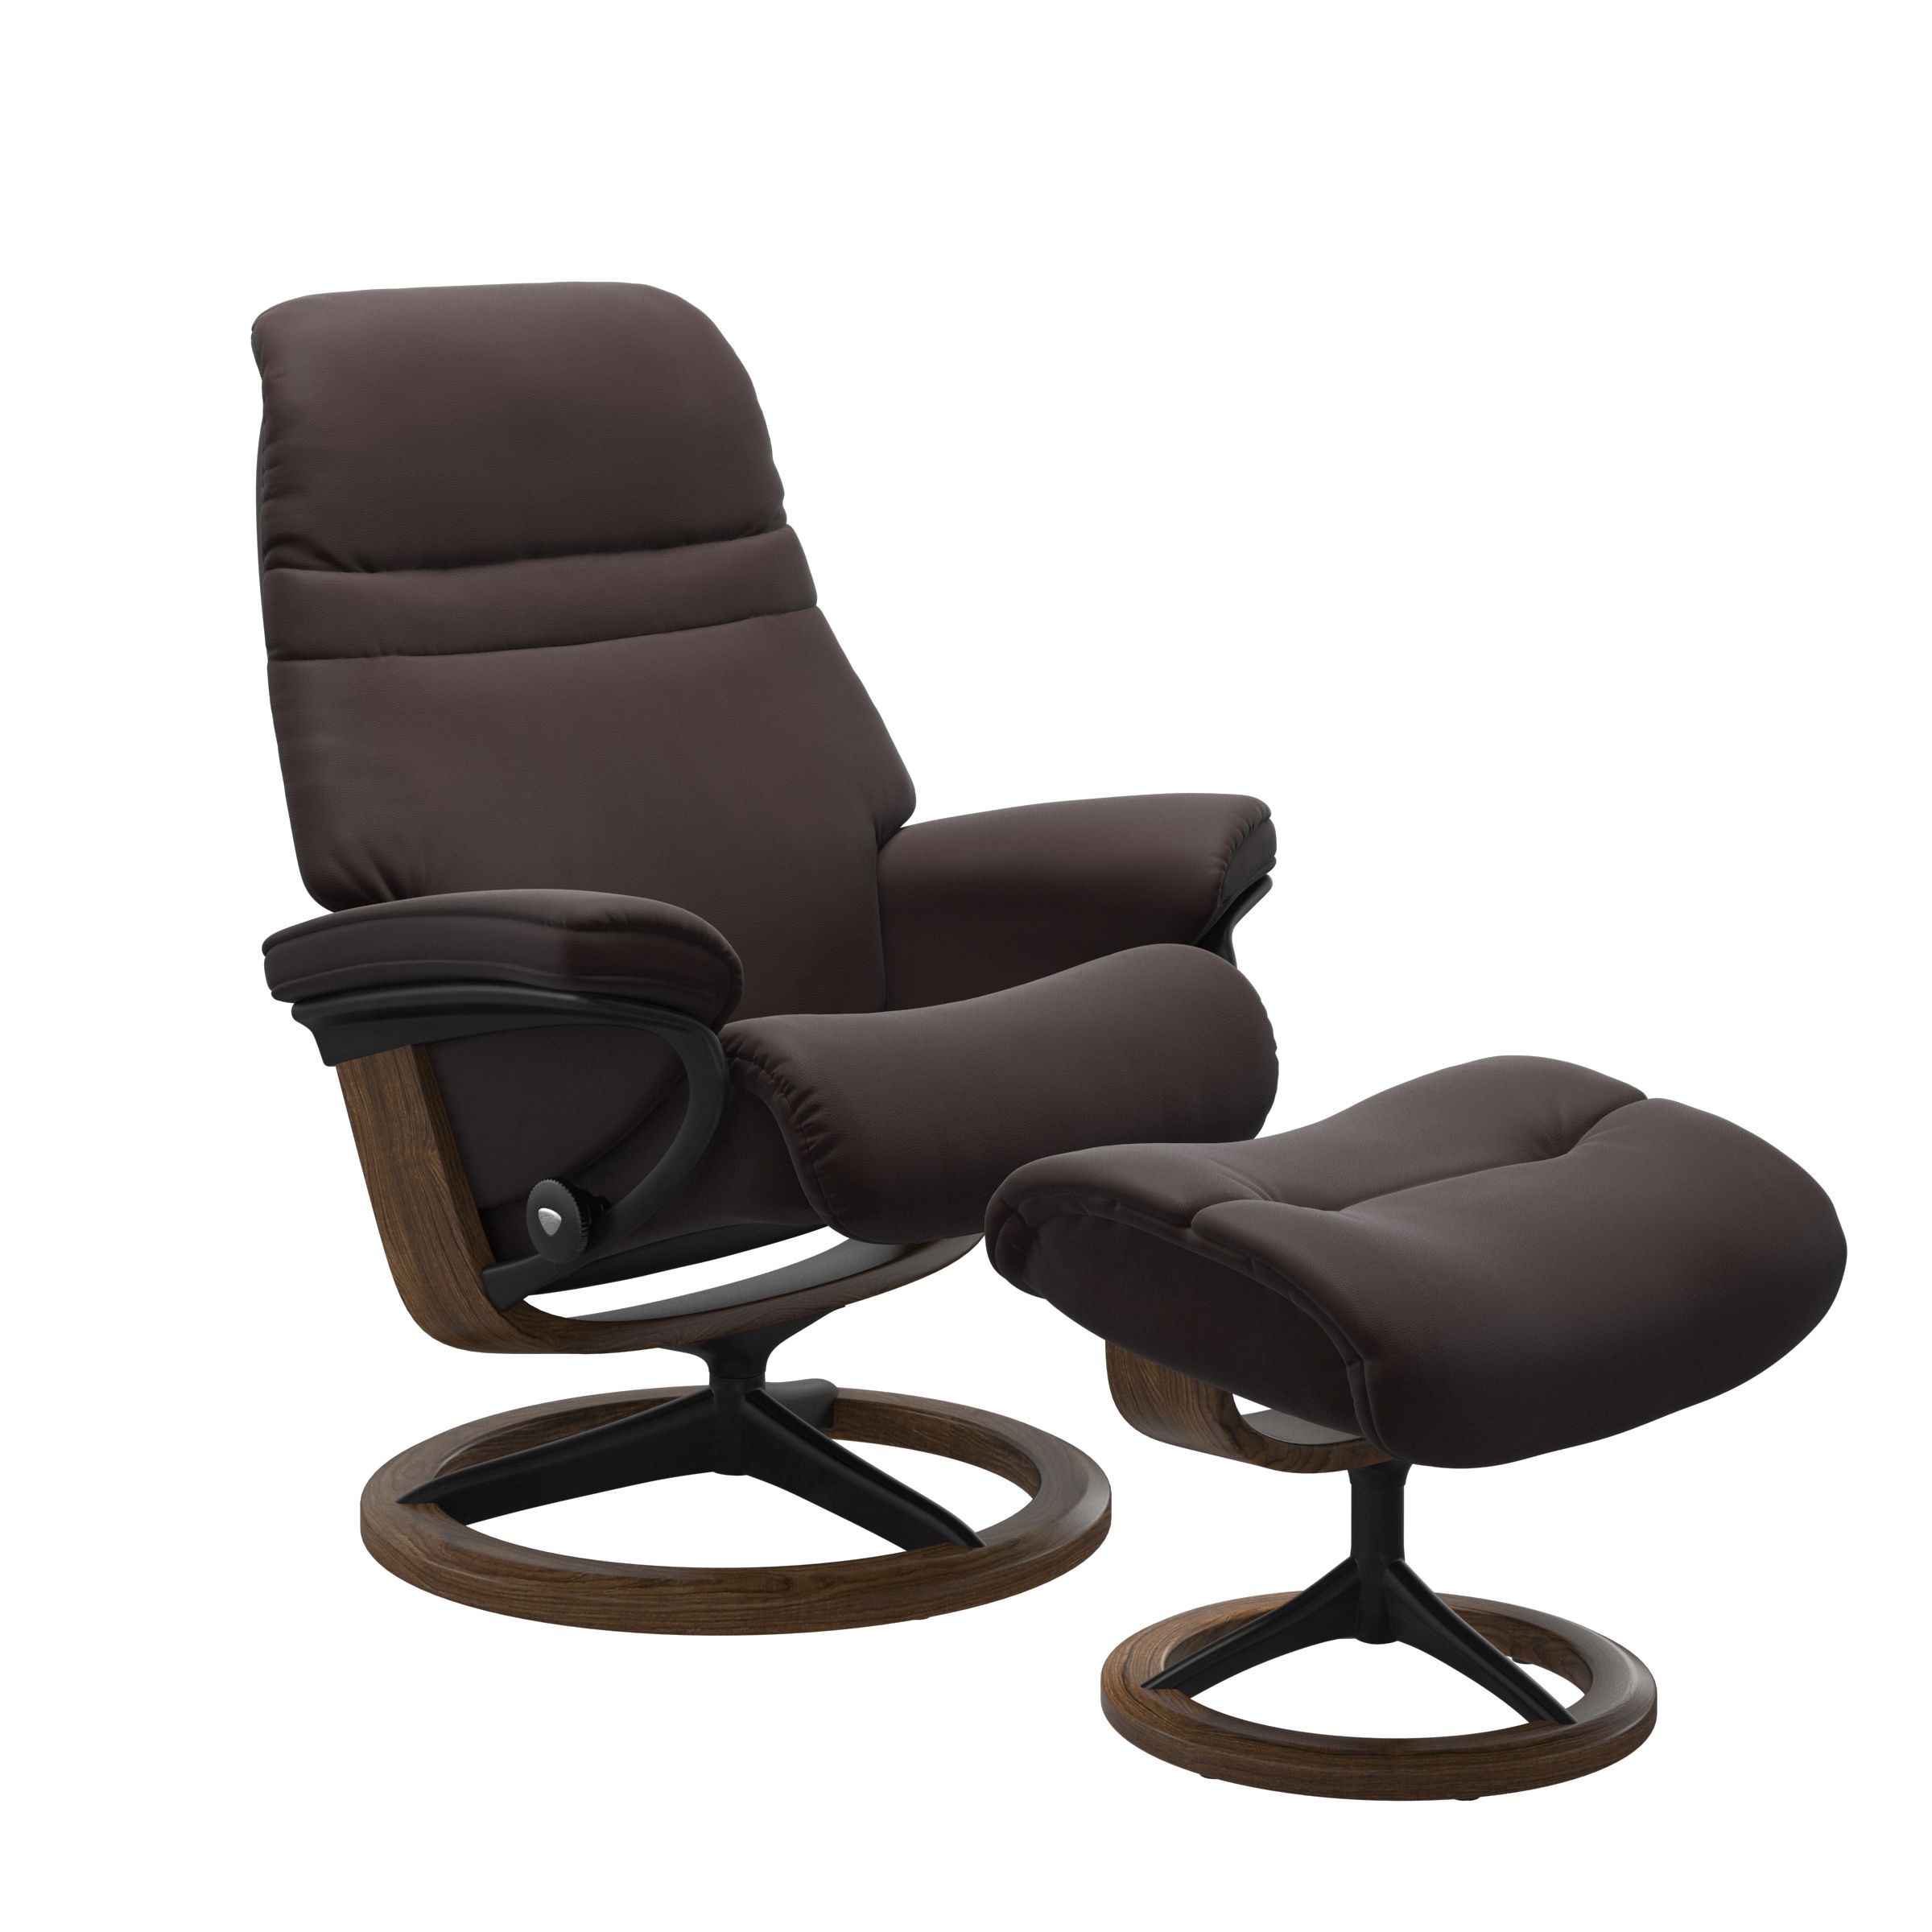 Stressless Sunrise Small Recliner and Ottoman with Signature Base